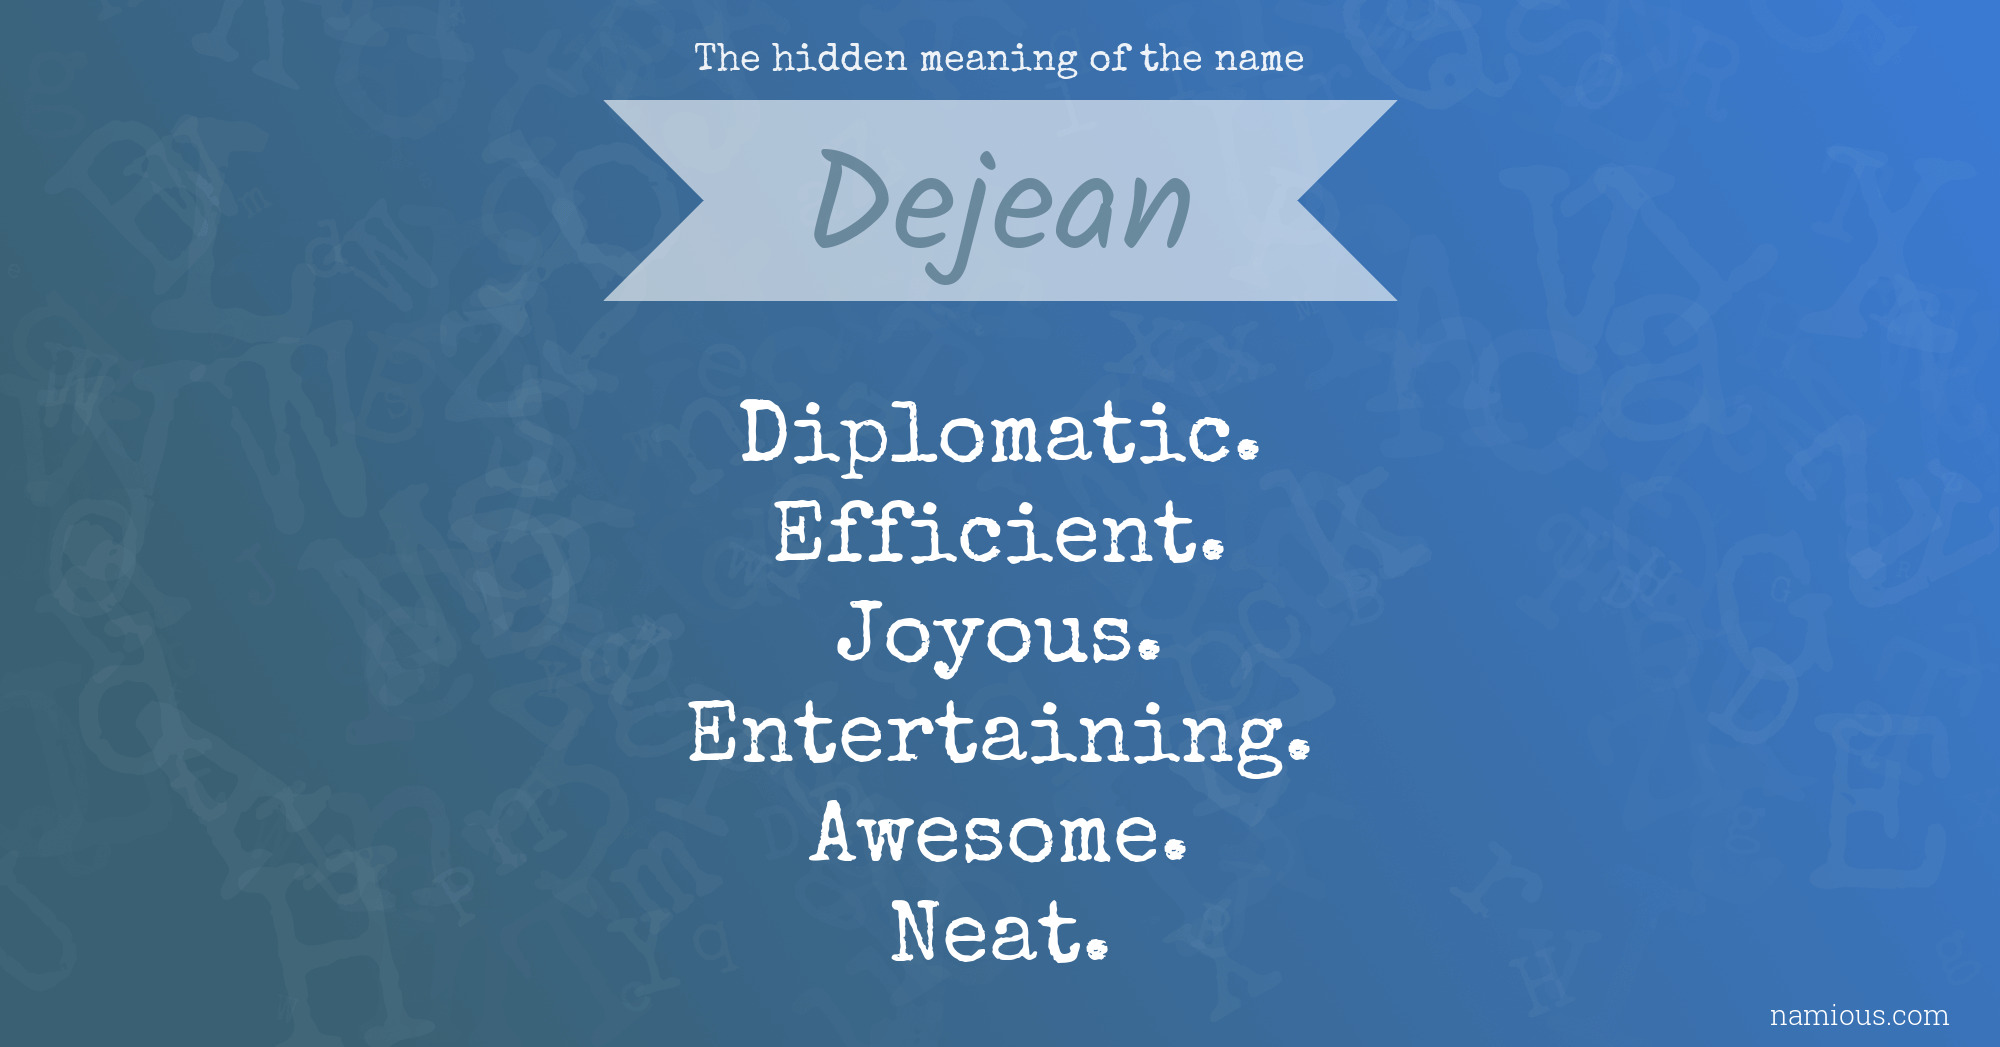 The hidden meaning of the name Dejean